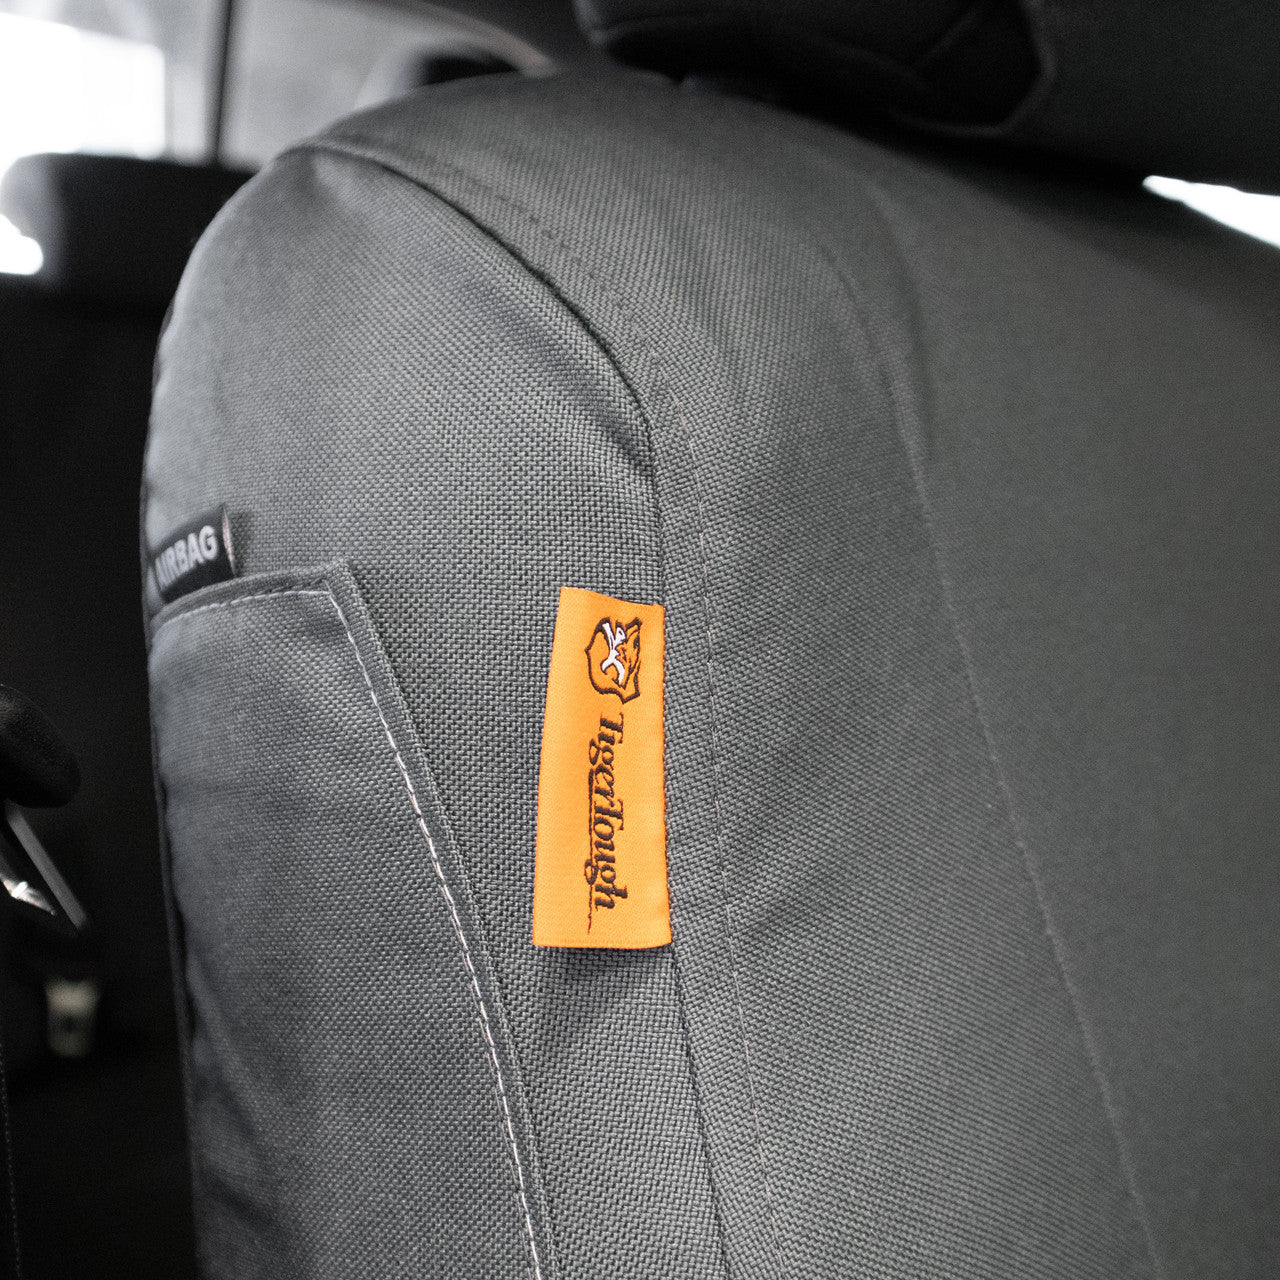 TigerTough Gray Seat Covers on a Toyota Tacoma Airbag Patch Detail